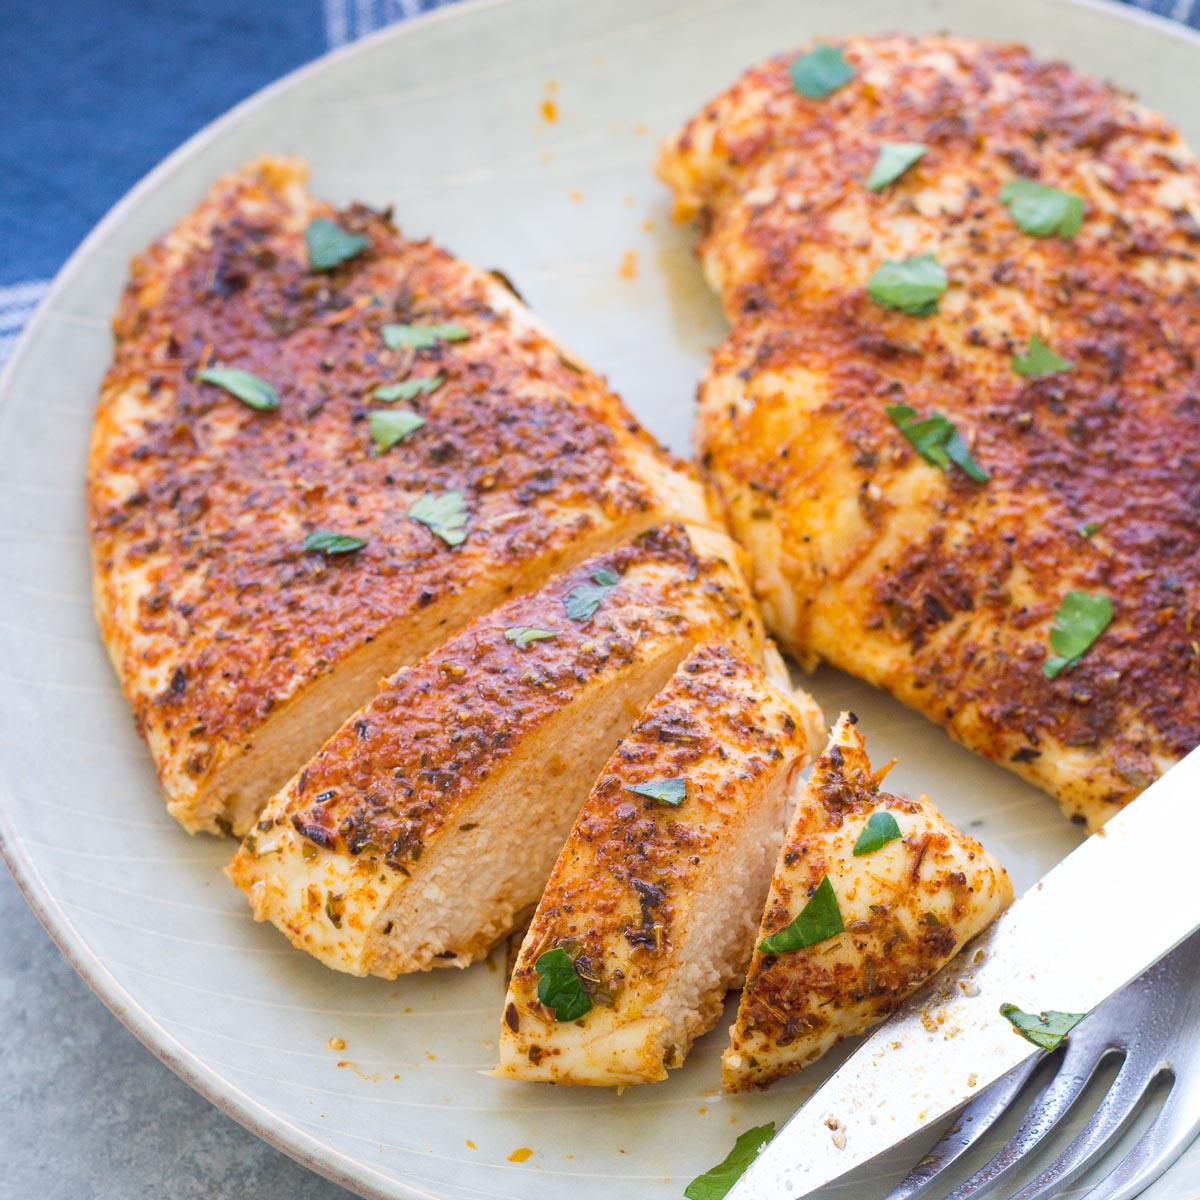 Baked Chicken Breast Recipe Juicy Flavorful,Magnolia Scale Treatment Home Depot